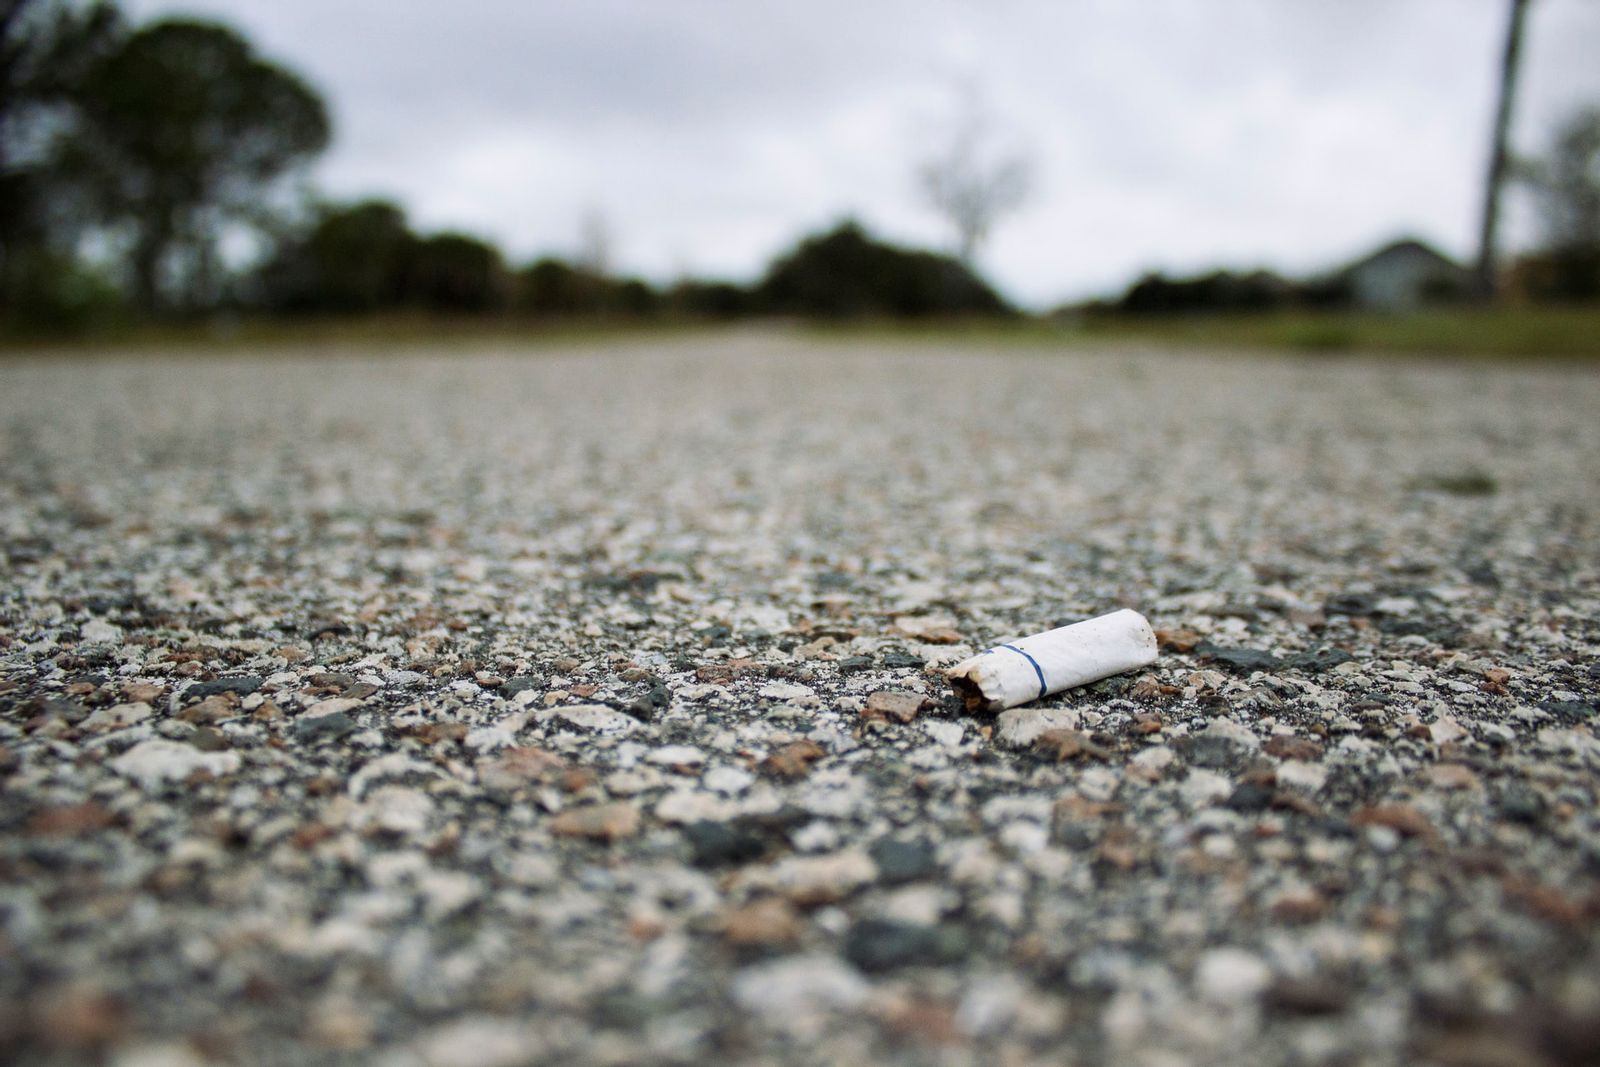 Dispose of cigarette butts responsibly with free pocket ashtray